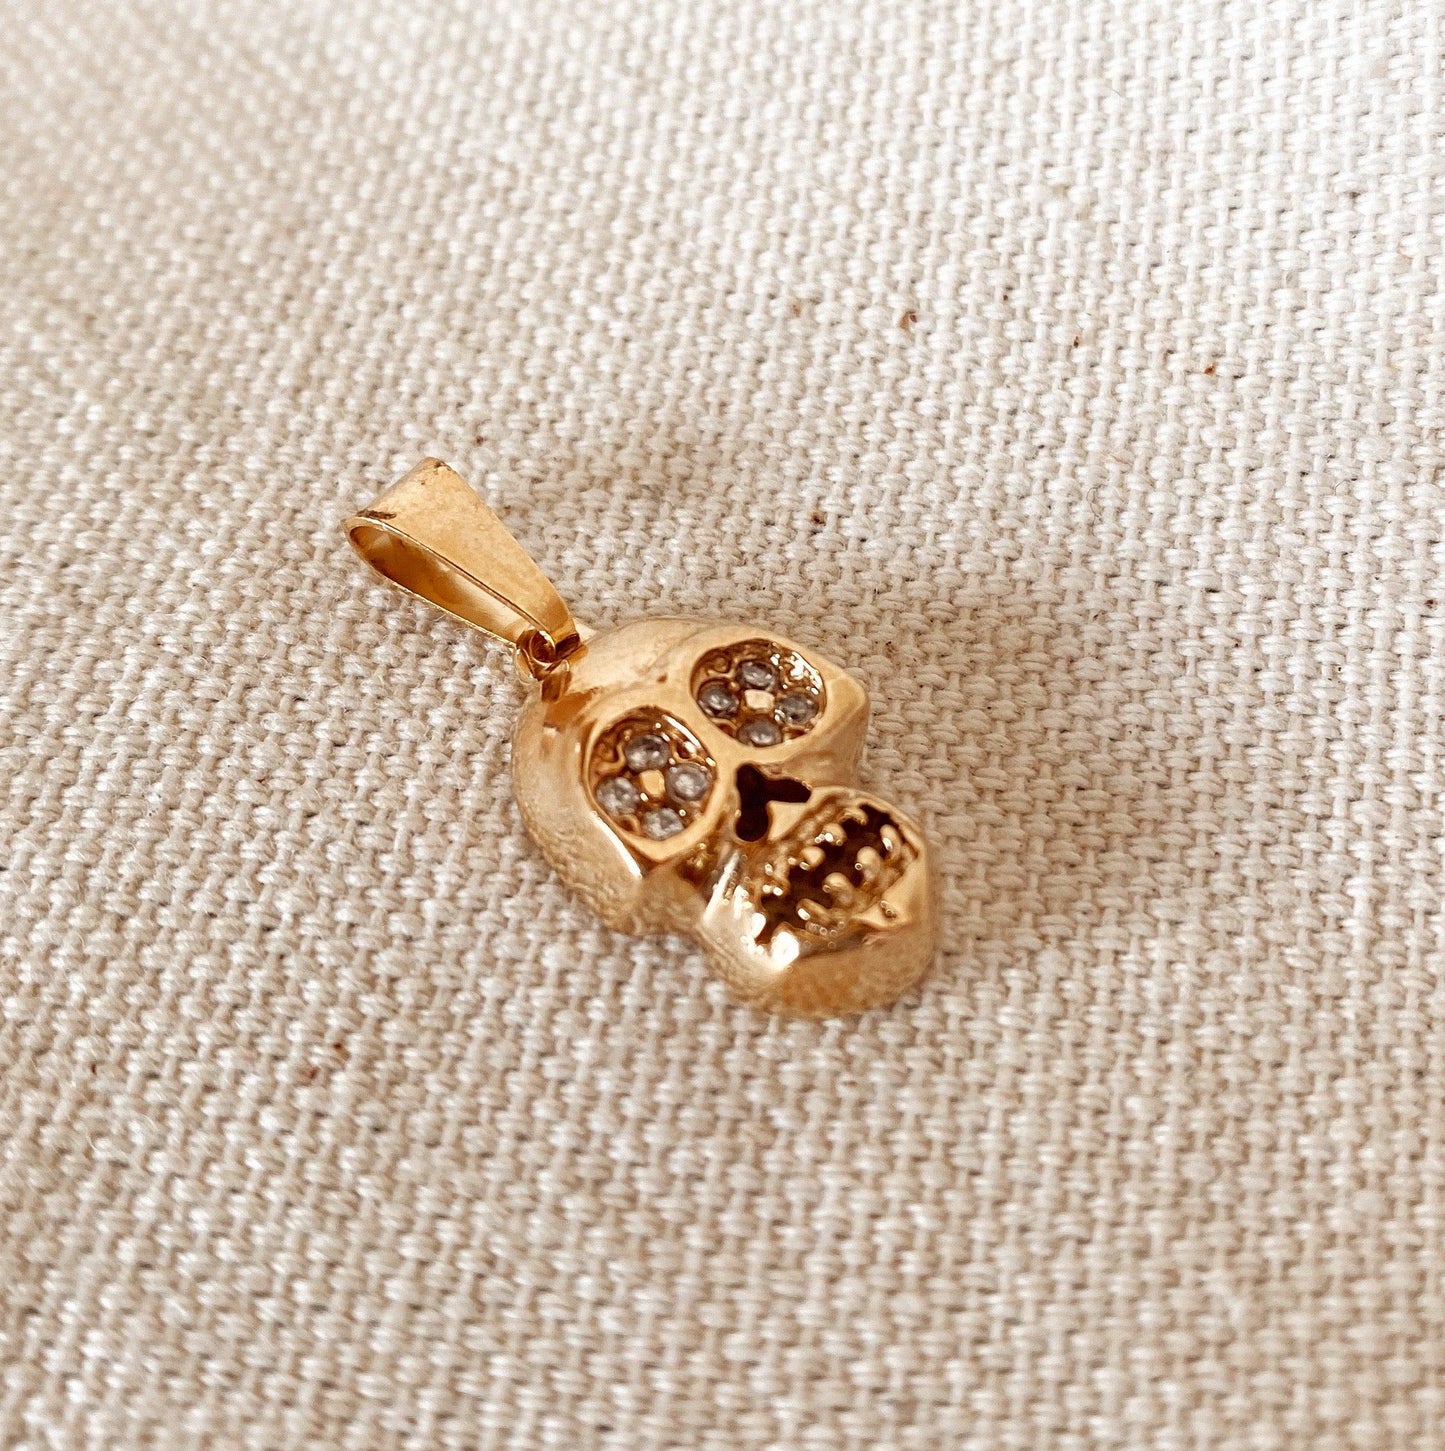 GoldFi 18k Gold Filled Skull Pendant Featuring Micro Pave Cubic Zirconia